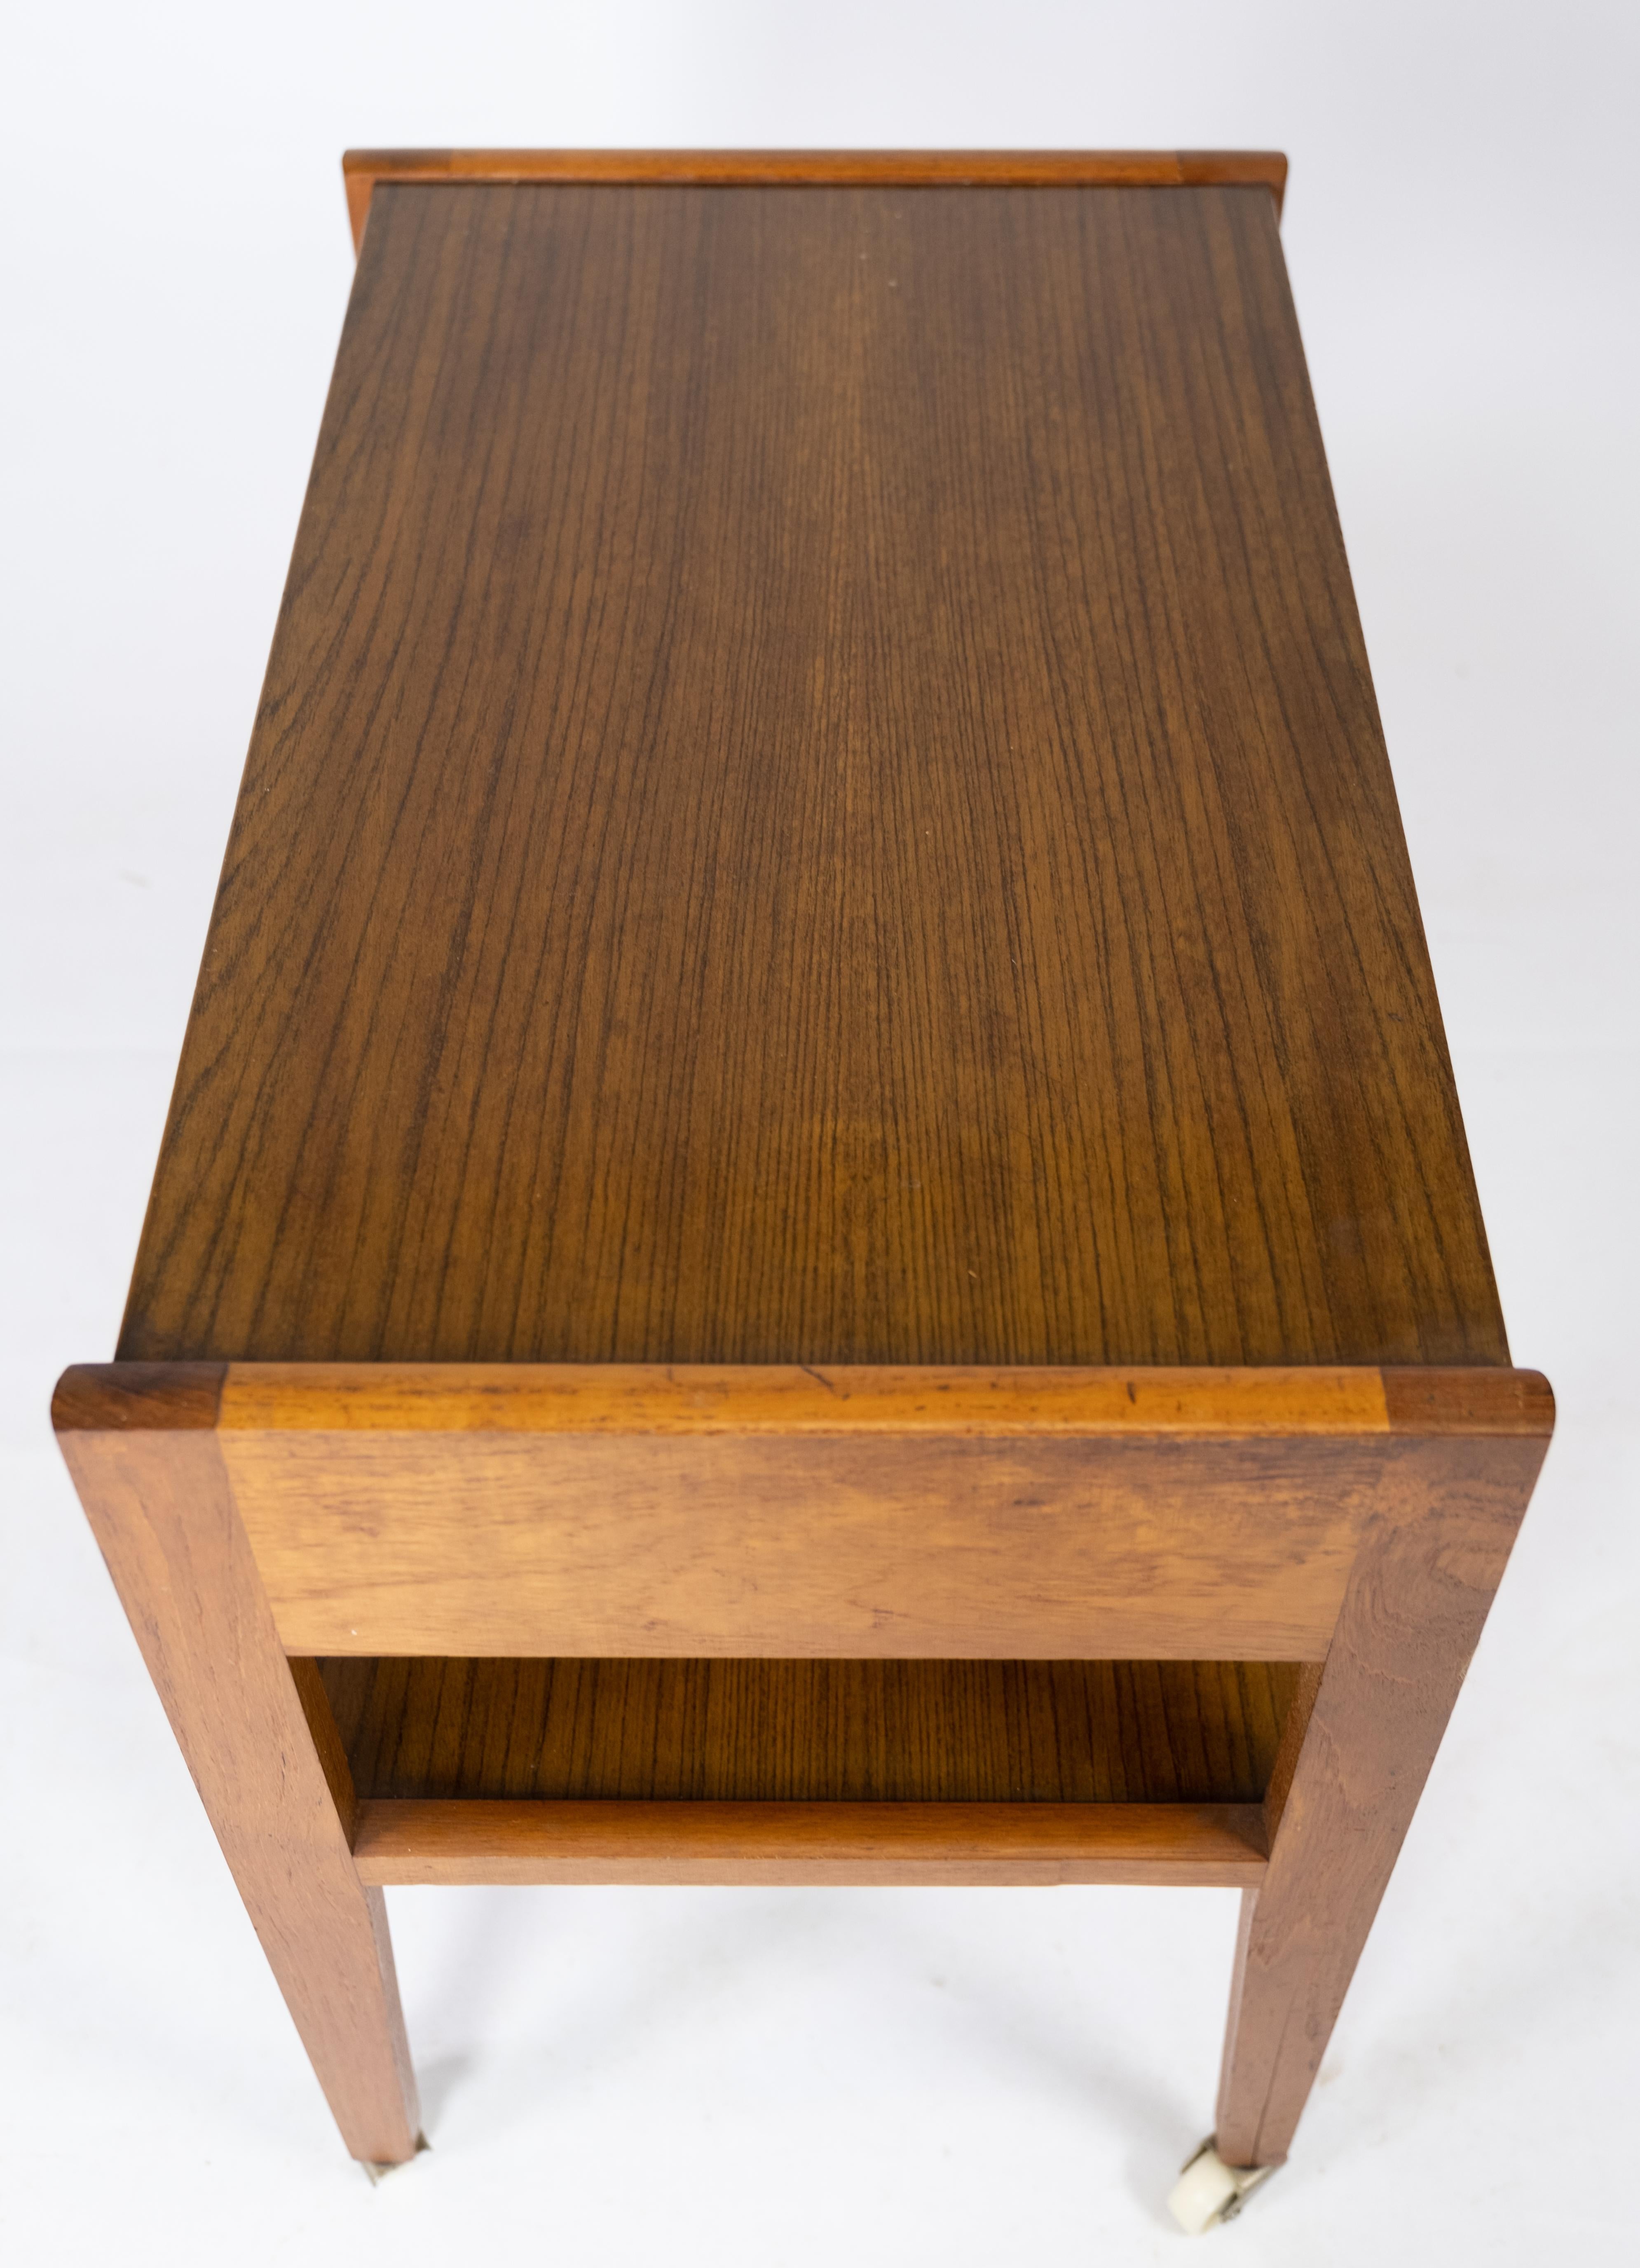 Scandinavian Modern Small Side Table with Drawer in Teak from the 1960s For Sale 2